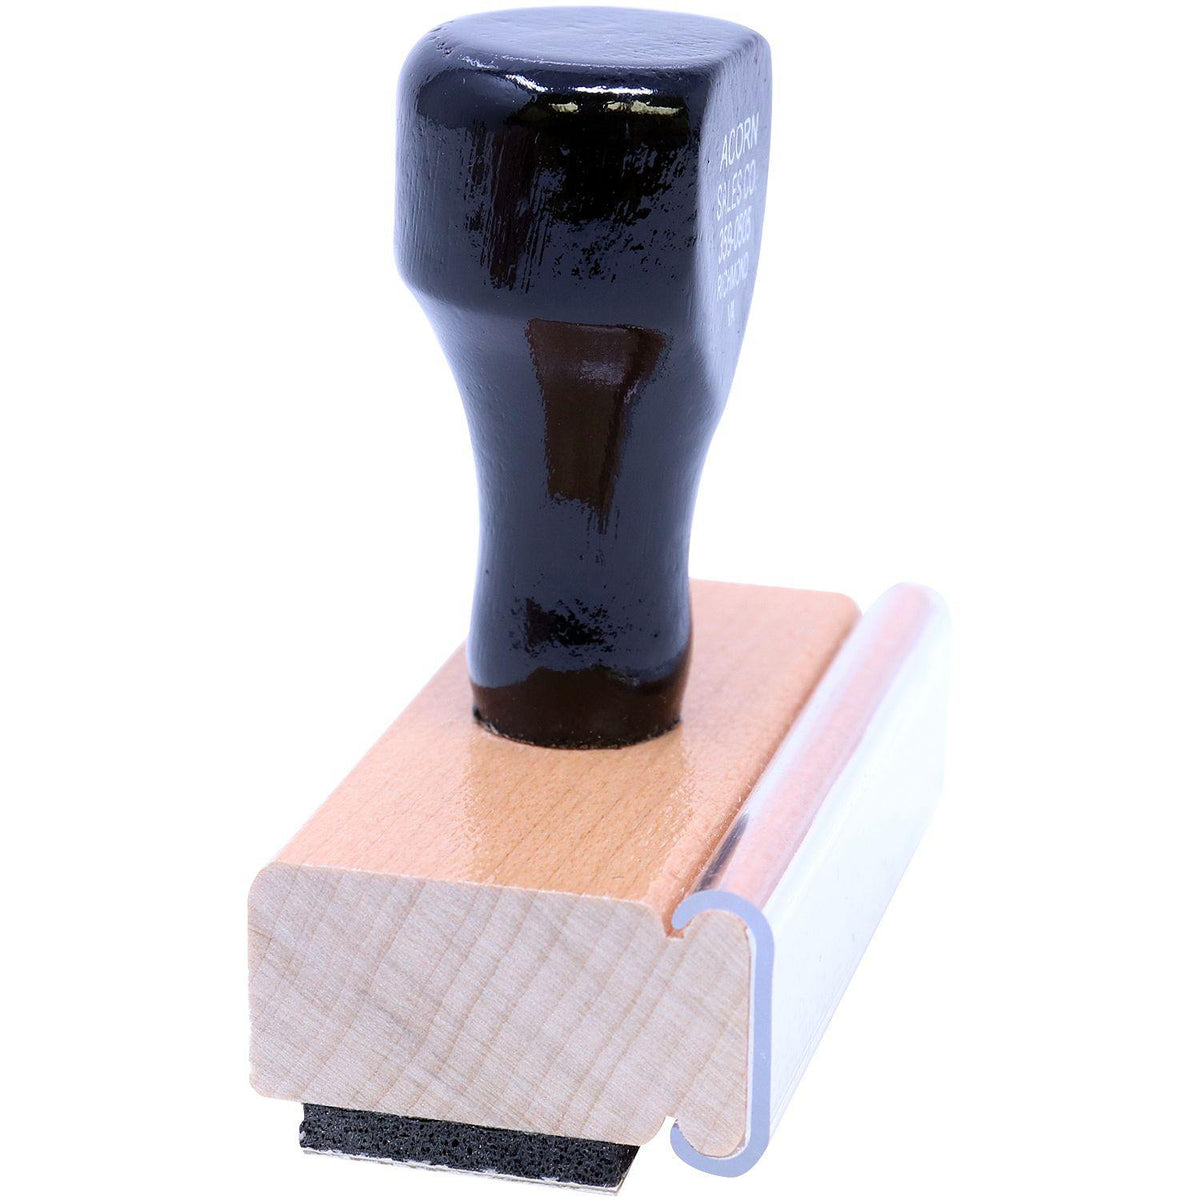 Side View of Large Hippa Rubber Stamp at an Angle